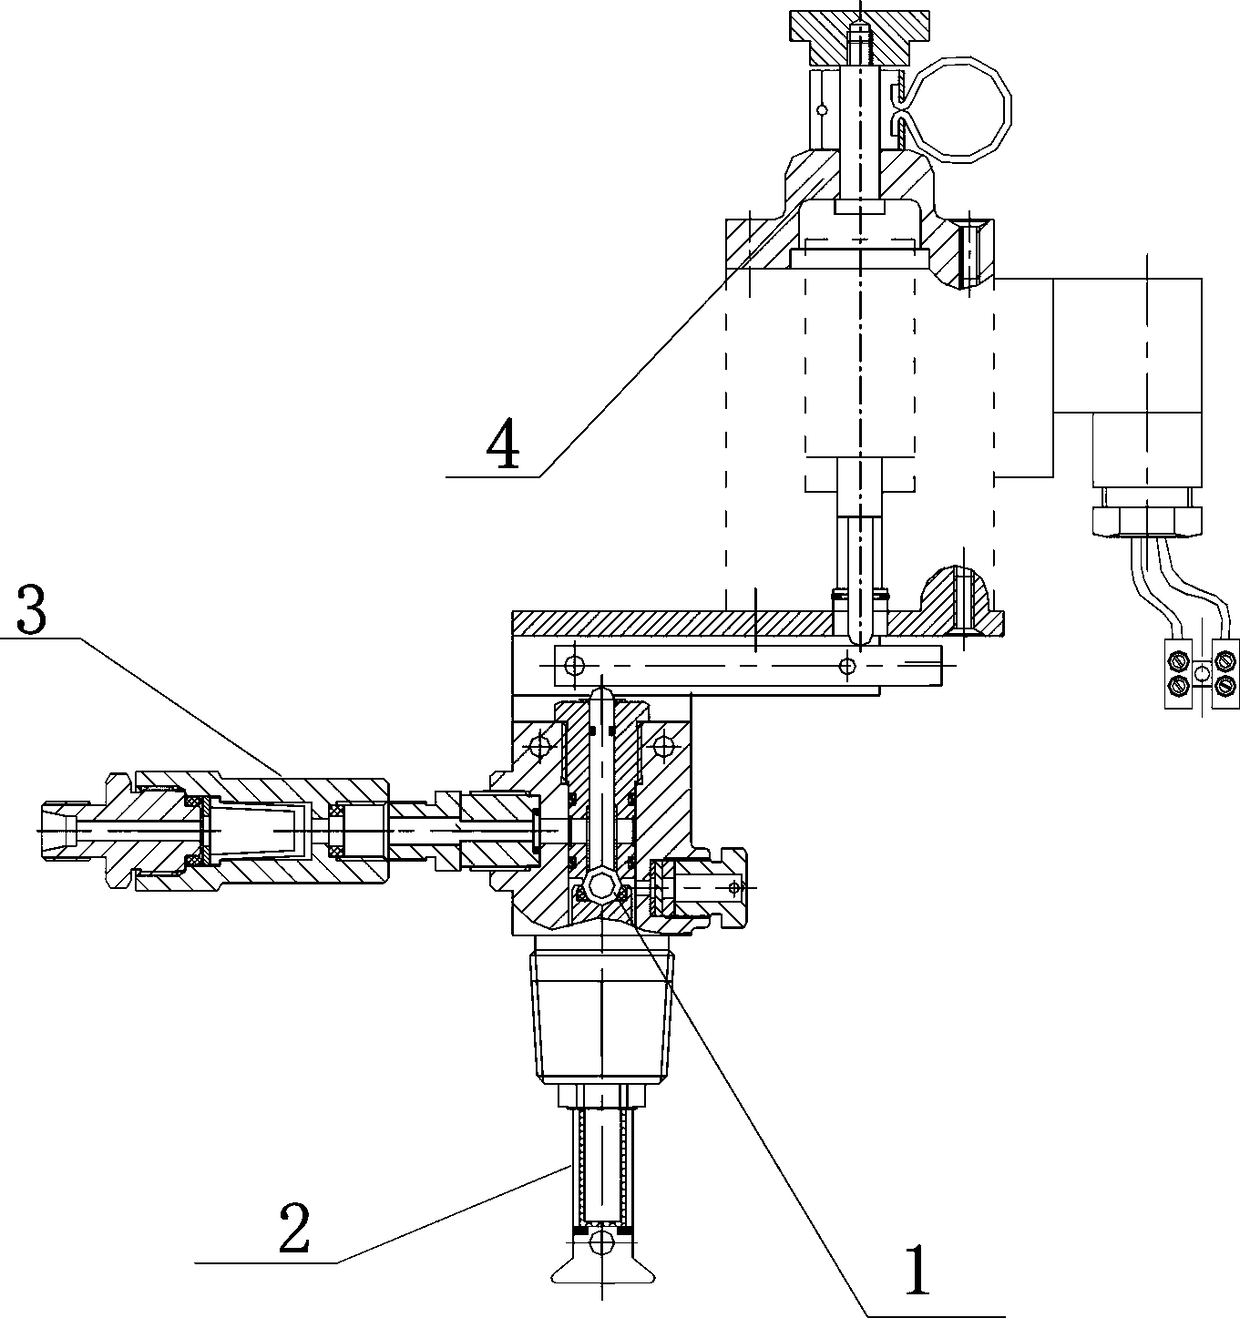 Container valve for driving gas cylinder set of carbon dioxide fire extinguishing system